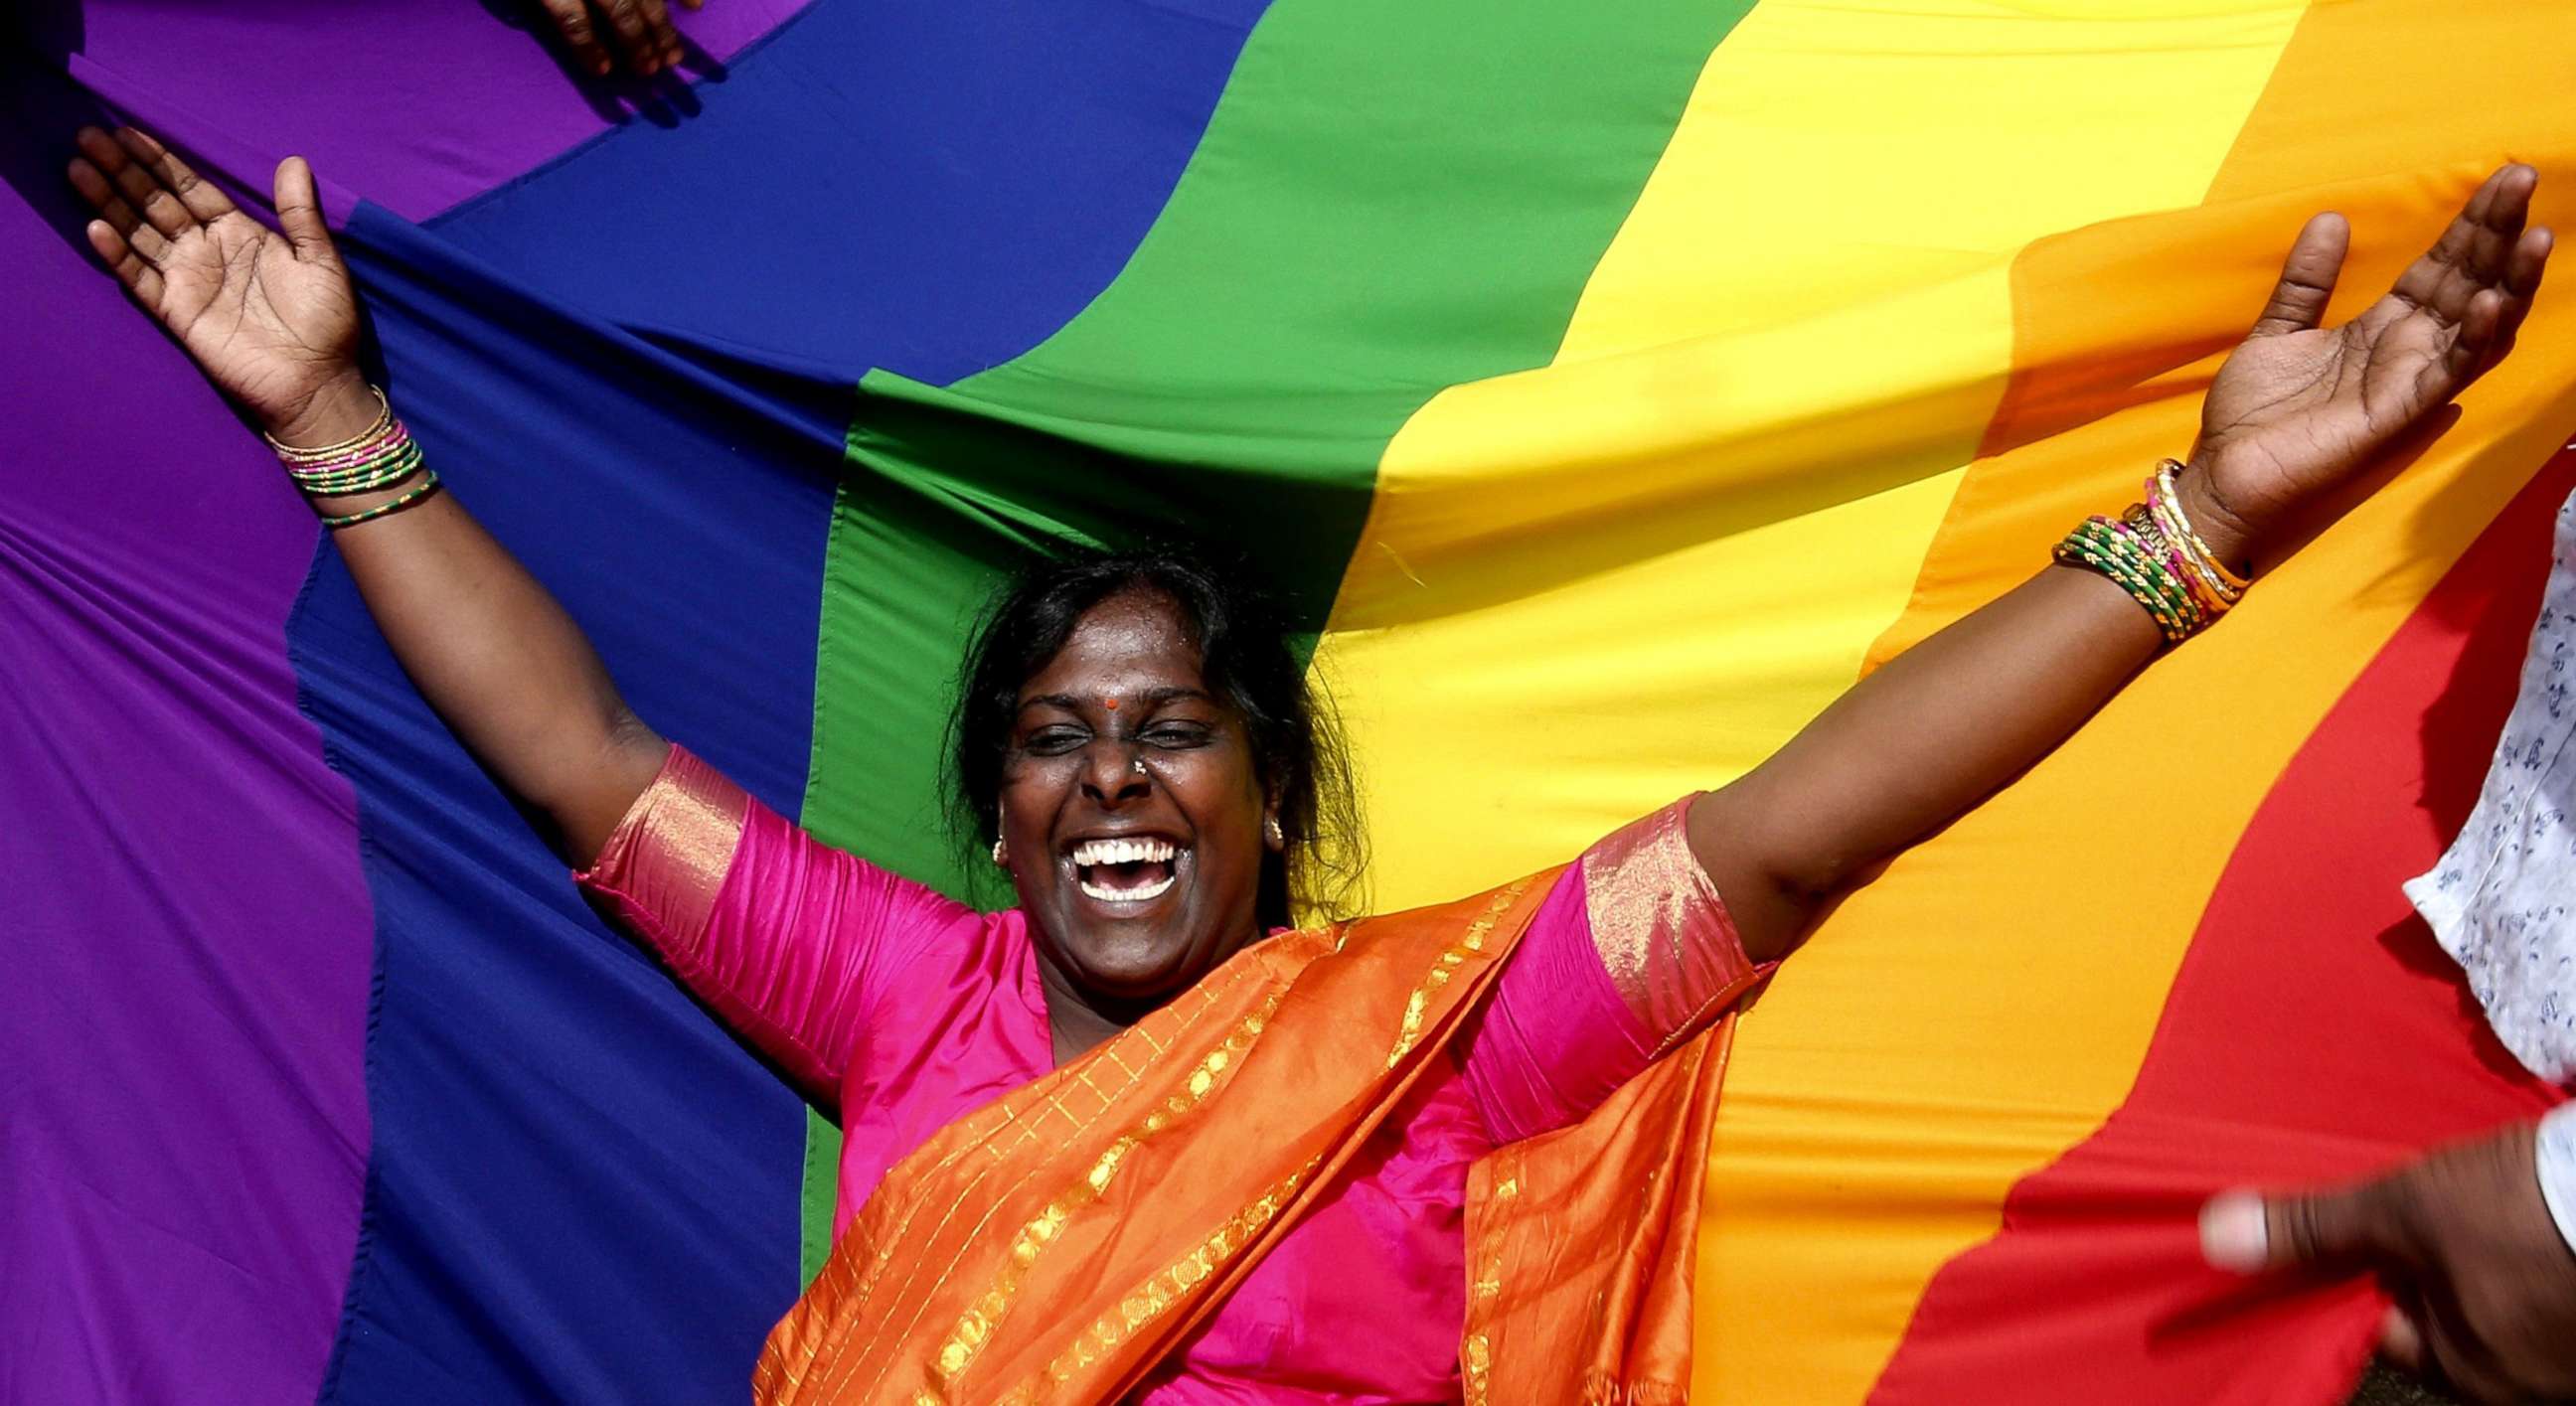 PHOTO: People in Bangalore, India celebrate after hearing the Supreme Court verdict legalizing gay sex between consenting adults on Sept. 6, 2018. 